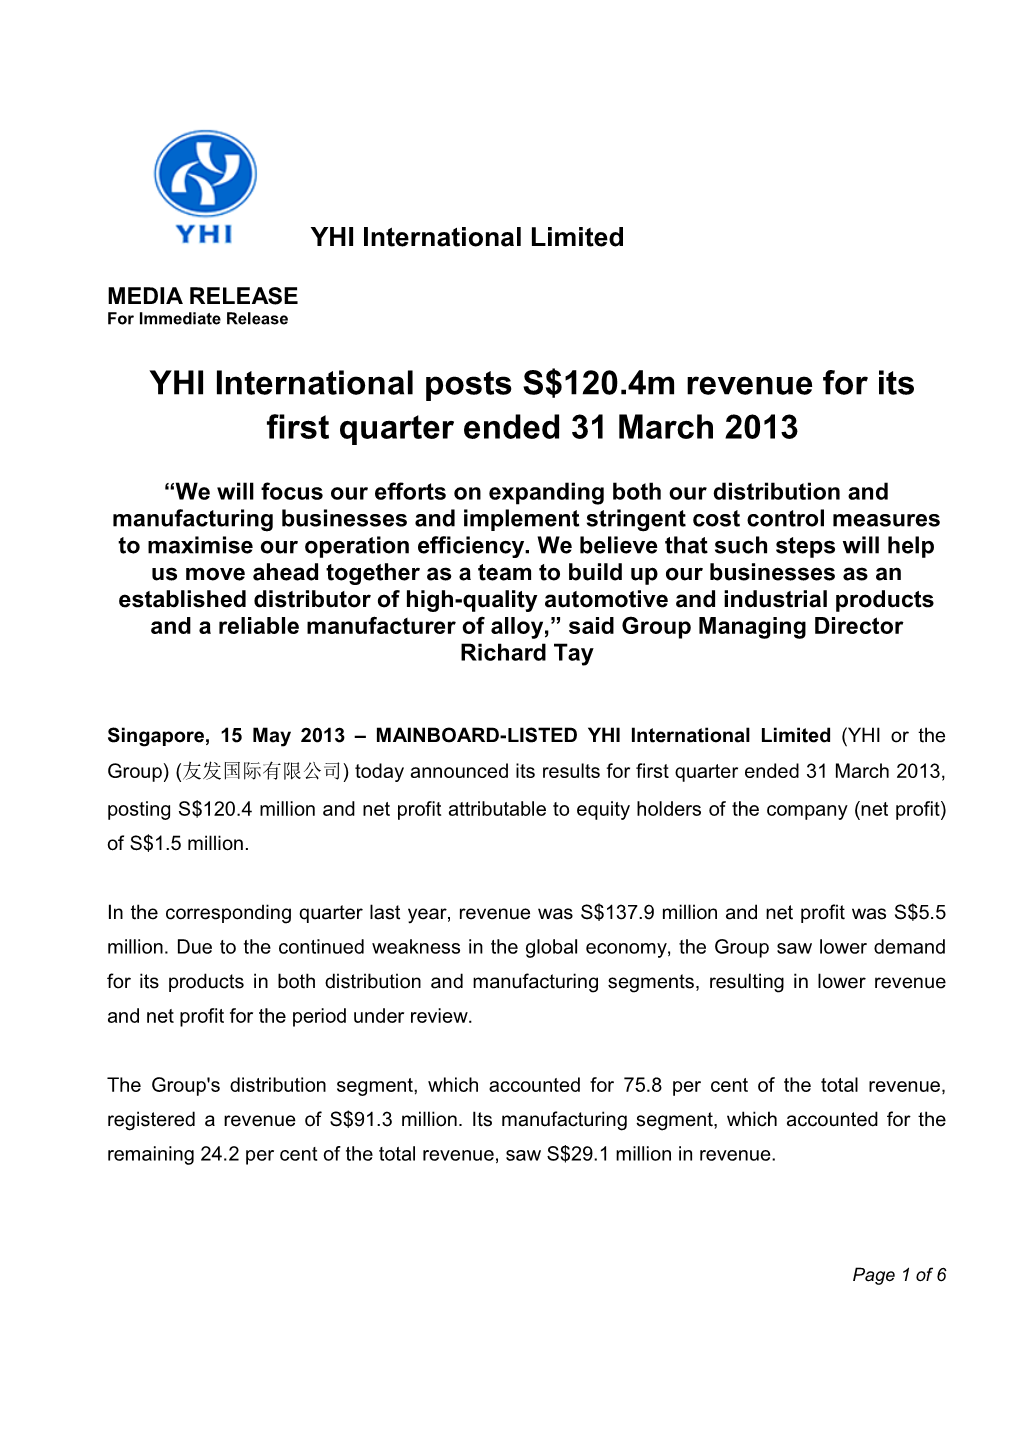 YHI International Posts S$120.4M Revenue for Its First Quarter Ended 31 March 2013